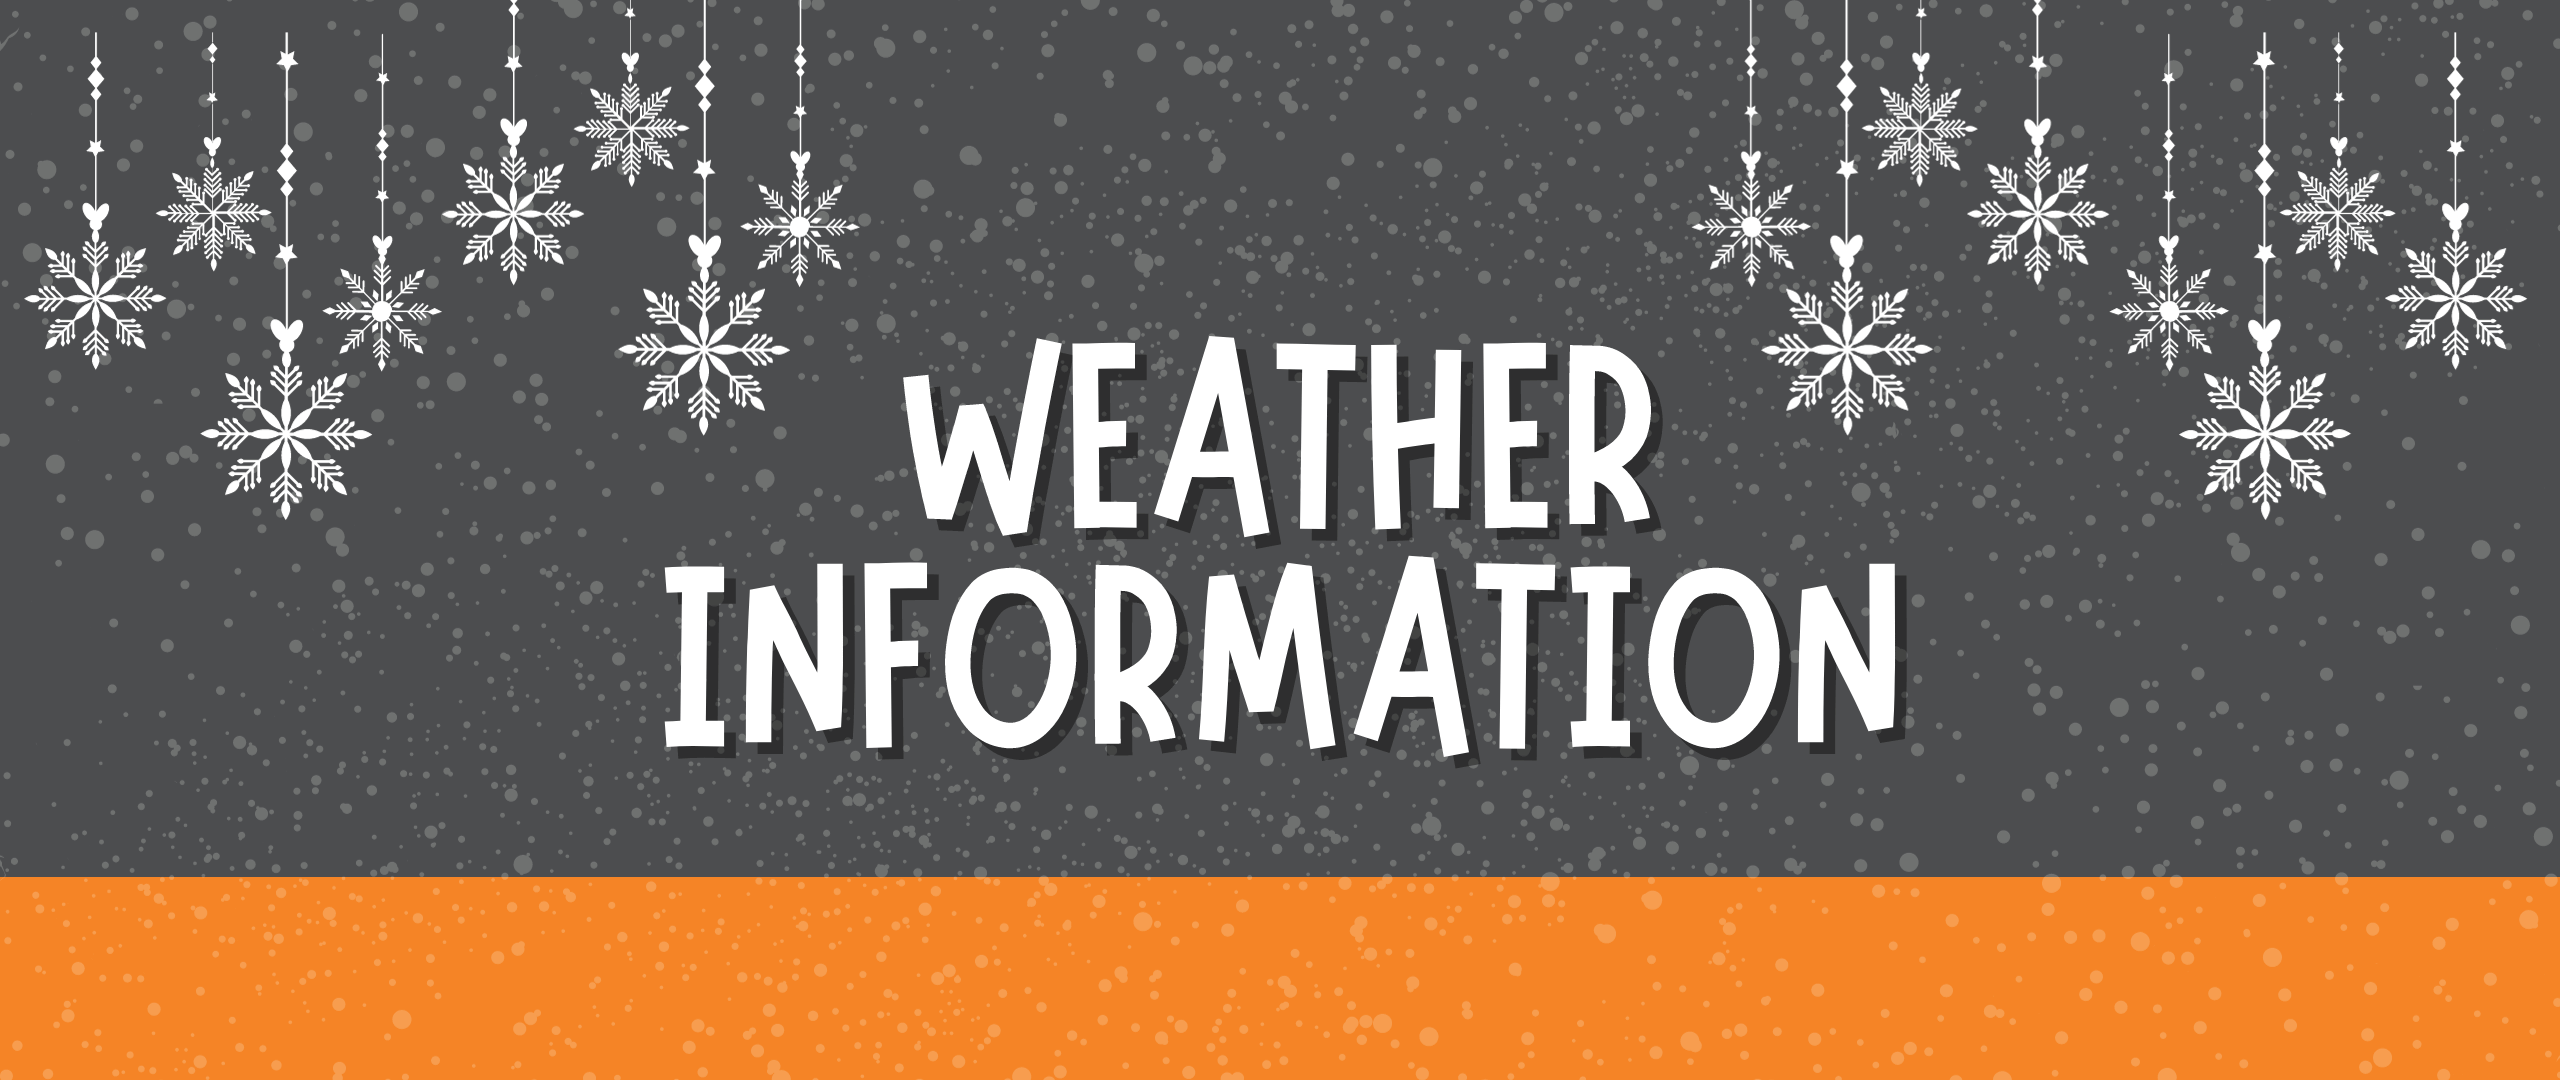 Information About Weather Decisions